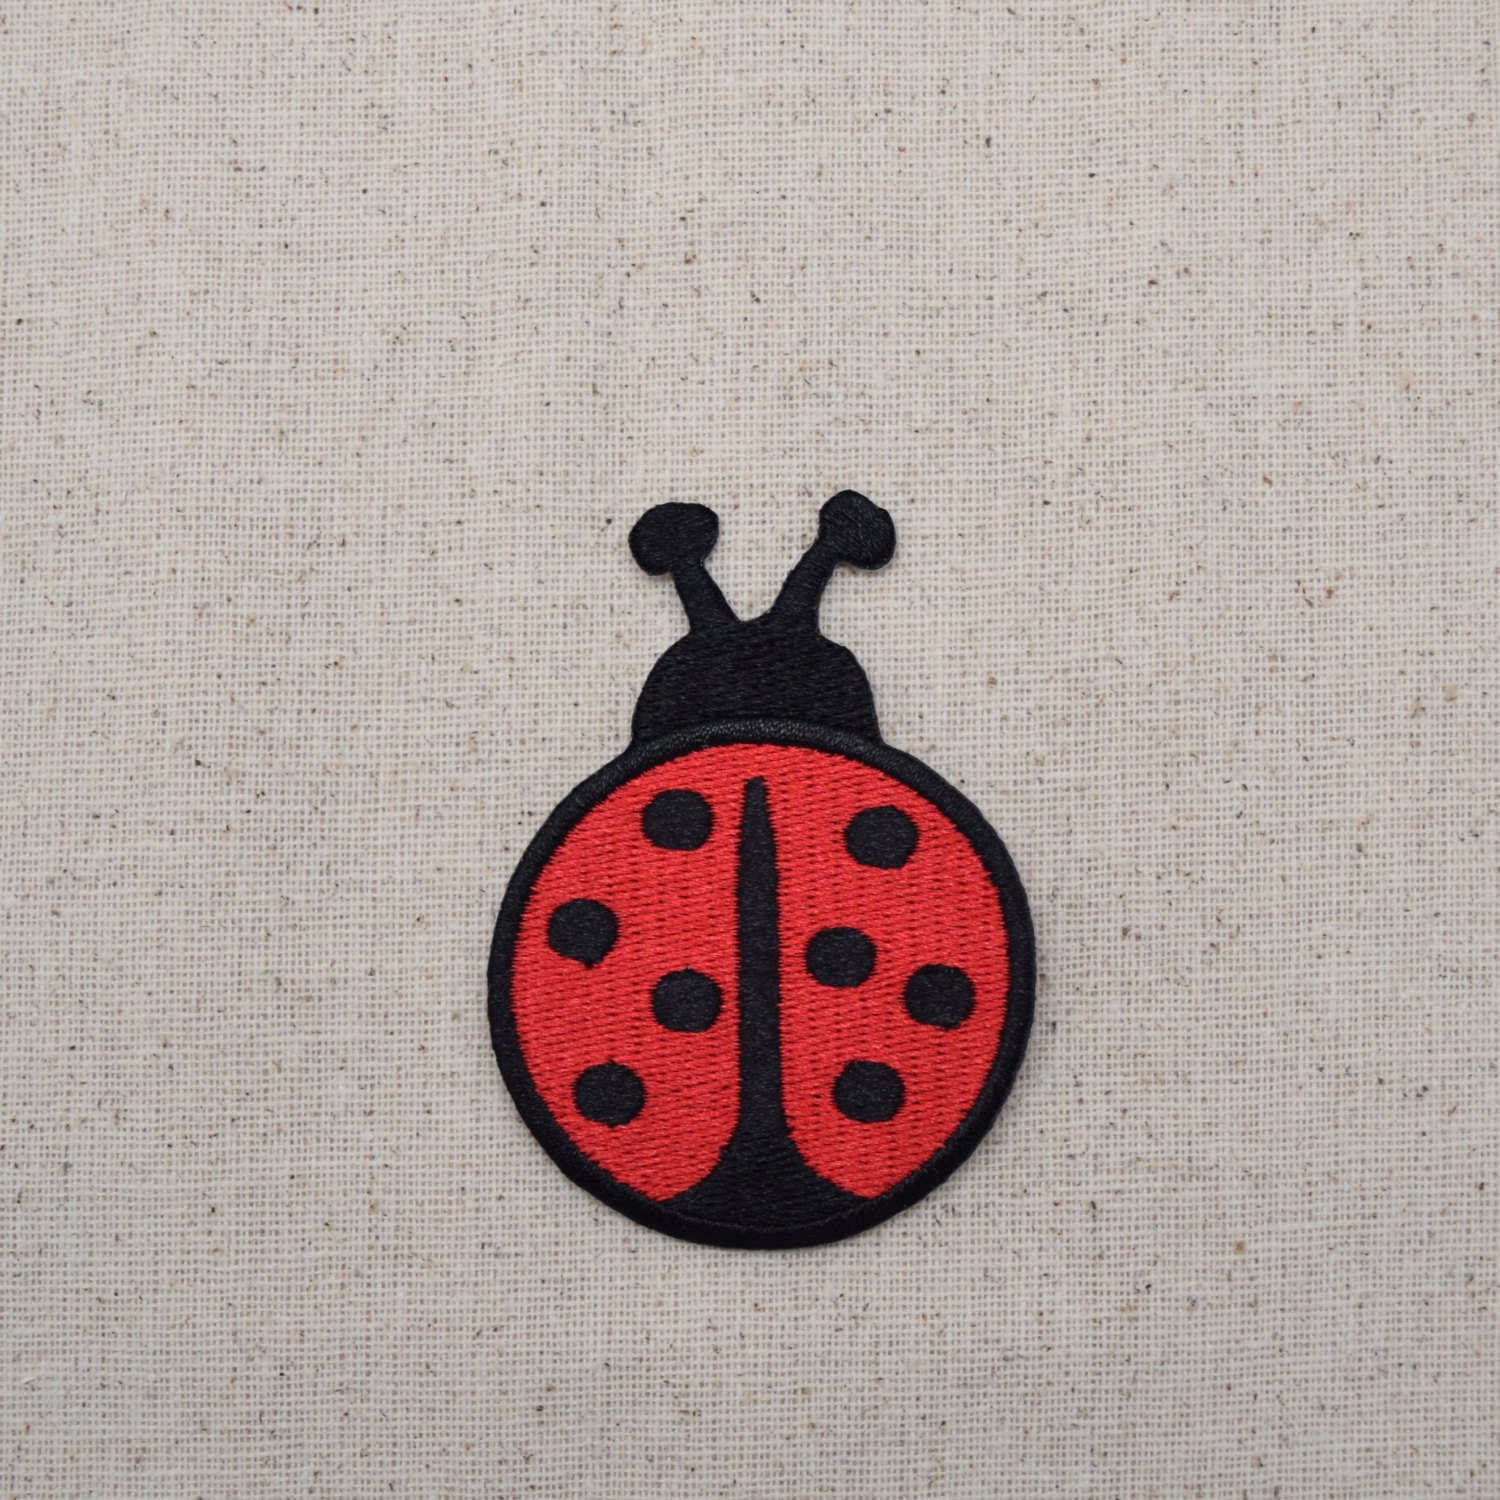 2x NAME LABEL TAG BEETLE BUG Embroidered Iron Sew On Cloth Patch Badge APPLIQUE 